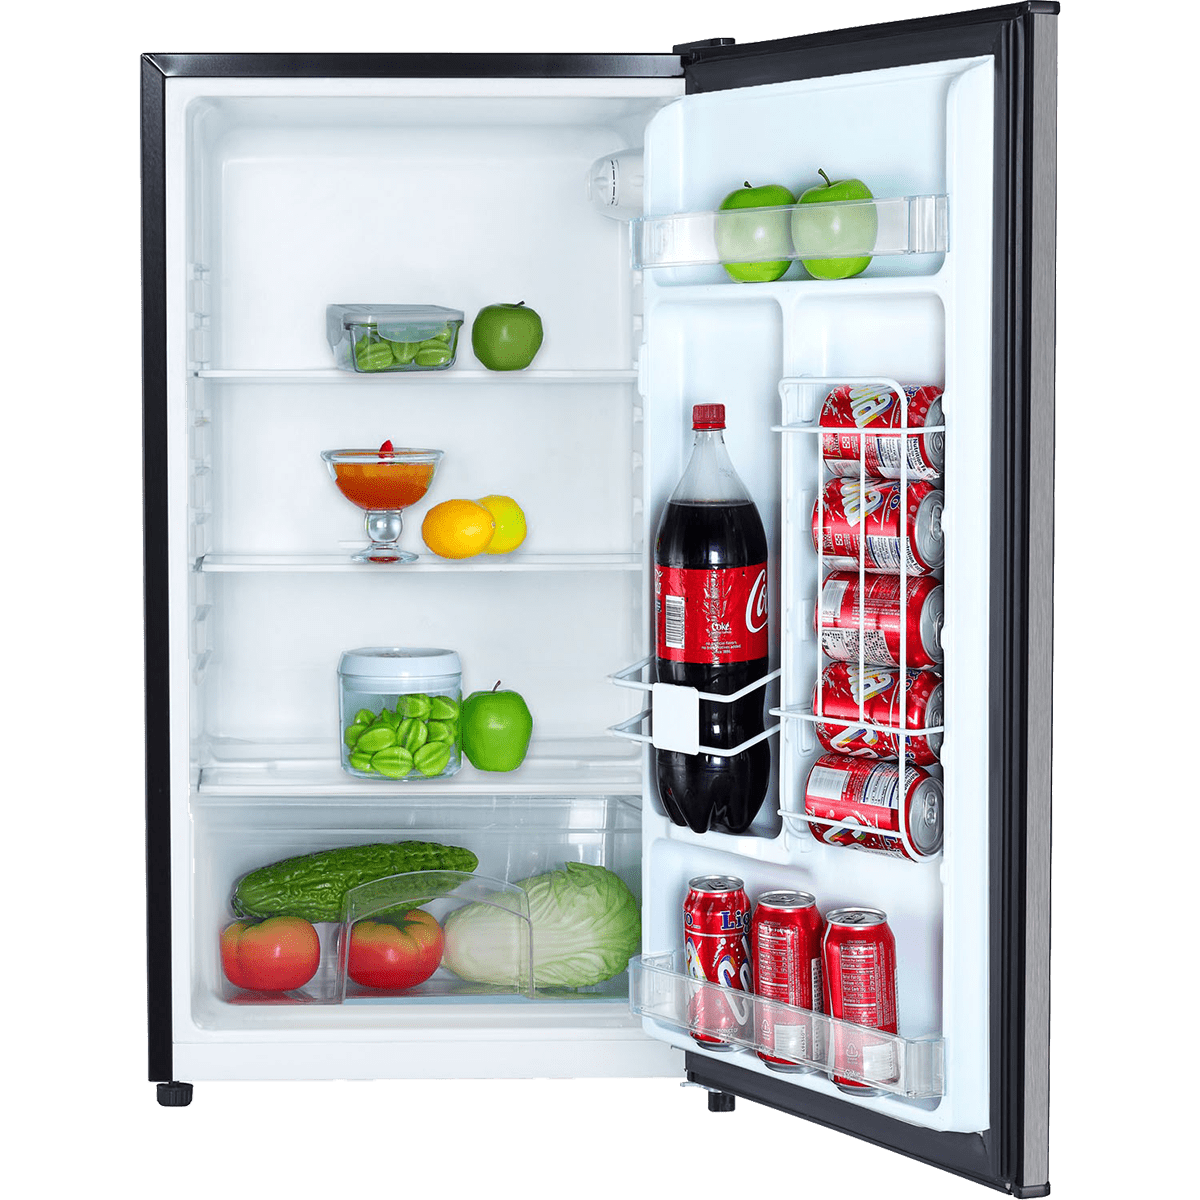 https://s3-assets.quenchessentials.com/media/images/products/magic-chef-3-2-cu-ft-energy-star-mini-refrigerator-stainless-steel-open-full.png